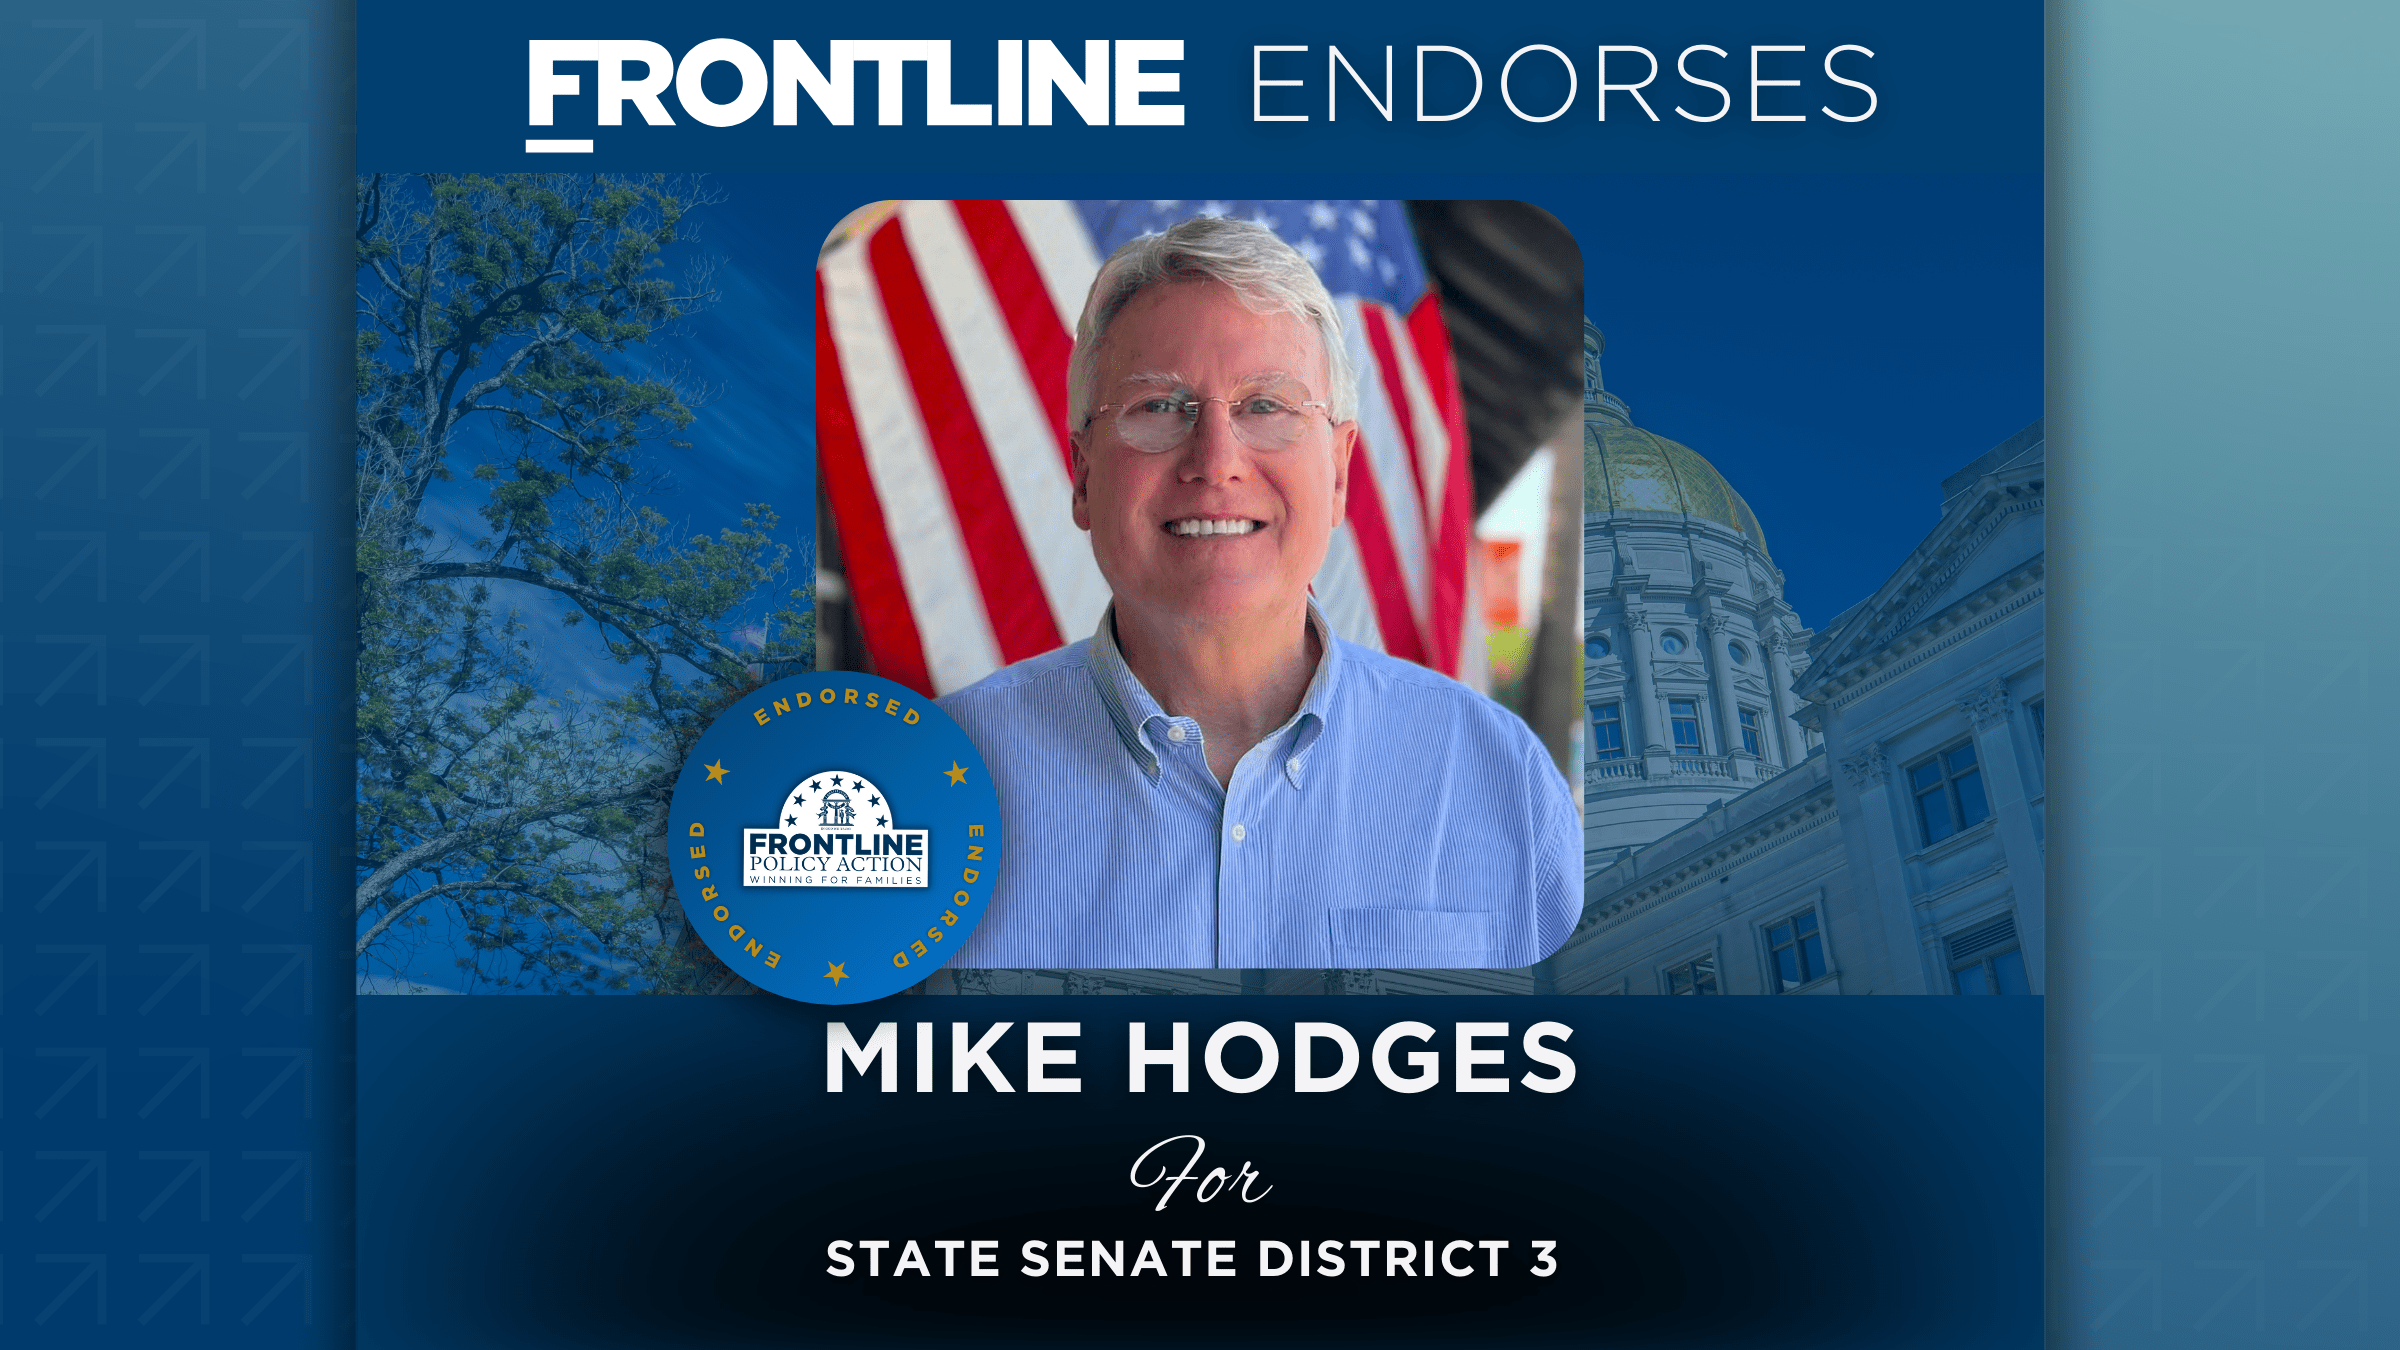 BREAKING: Frontline Endorses Mike Hodges for State Senate District 3